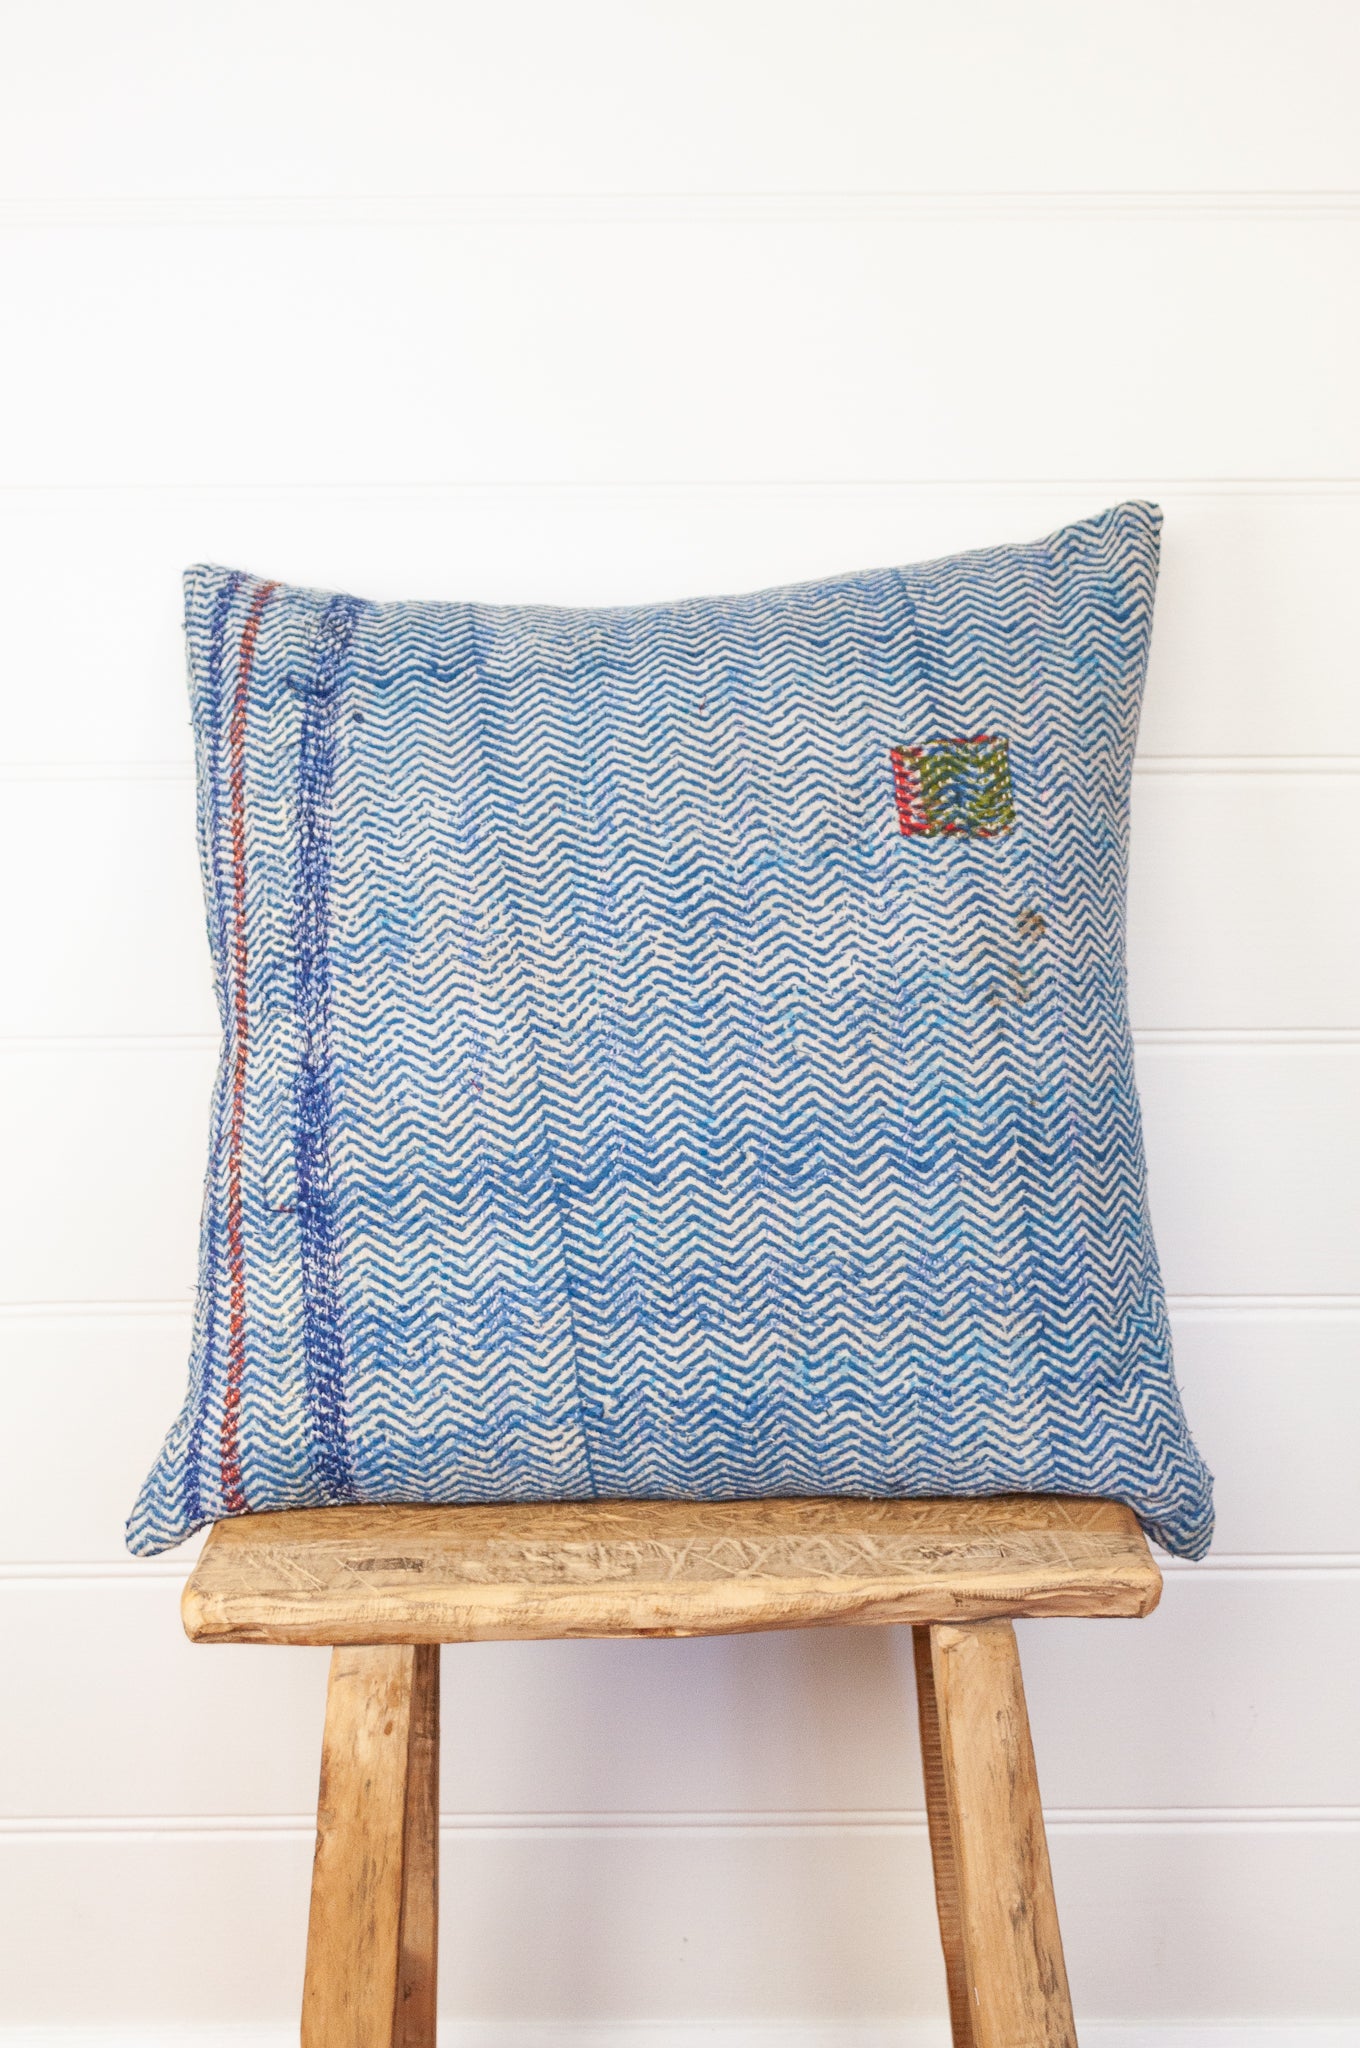 Vintage kantha quilt cushion, overdyed with blue and white blockprint chevron stripe pattern with red highlights.